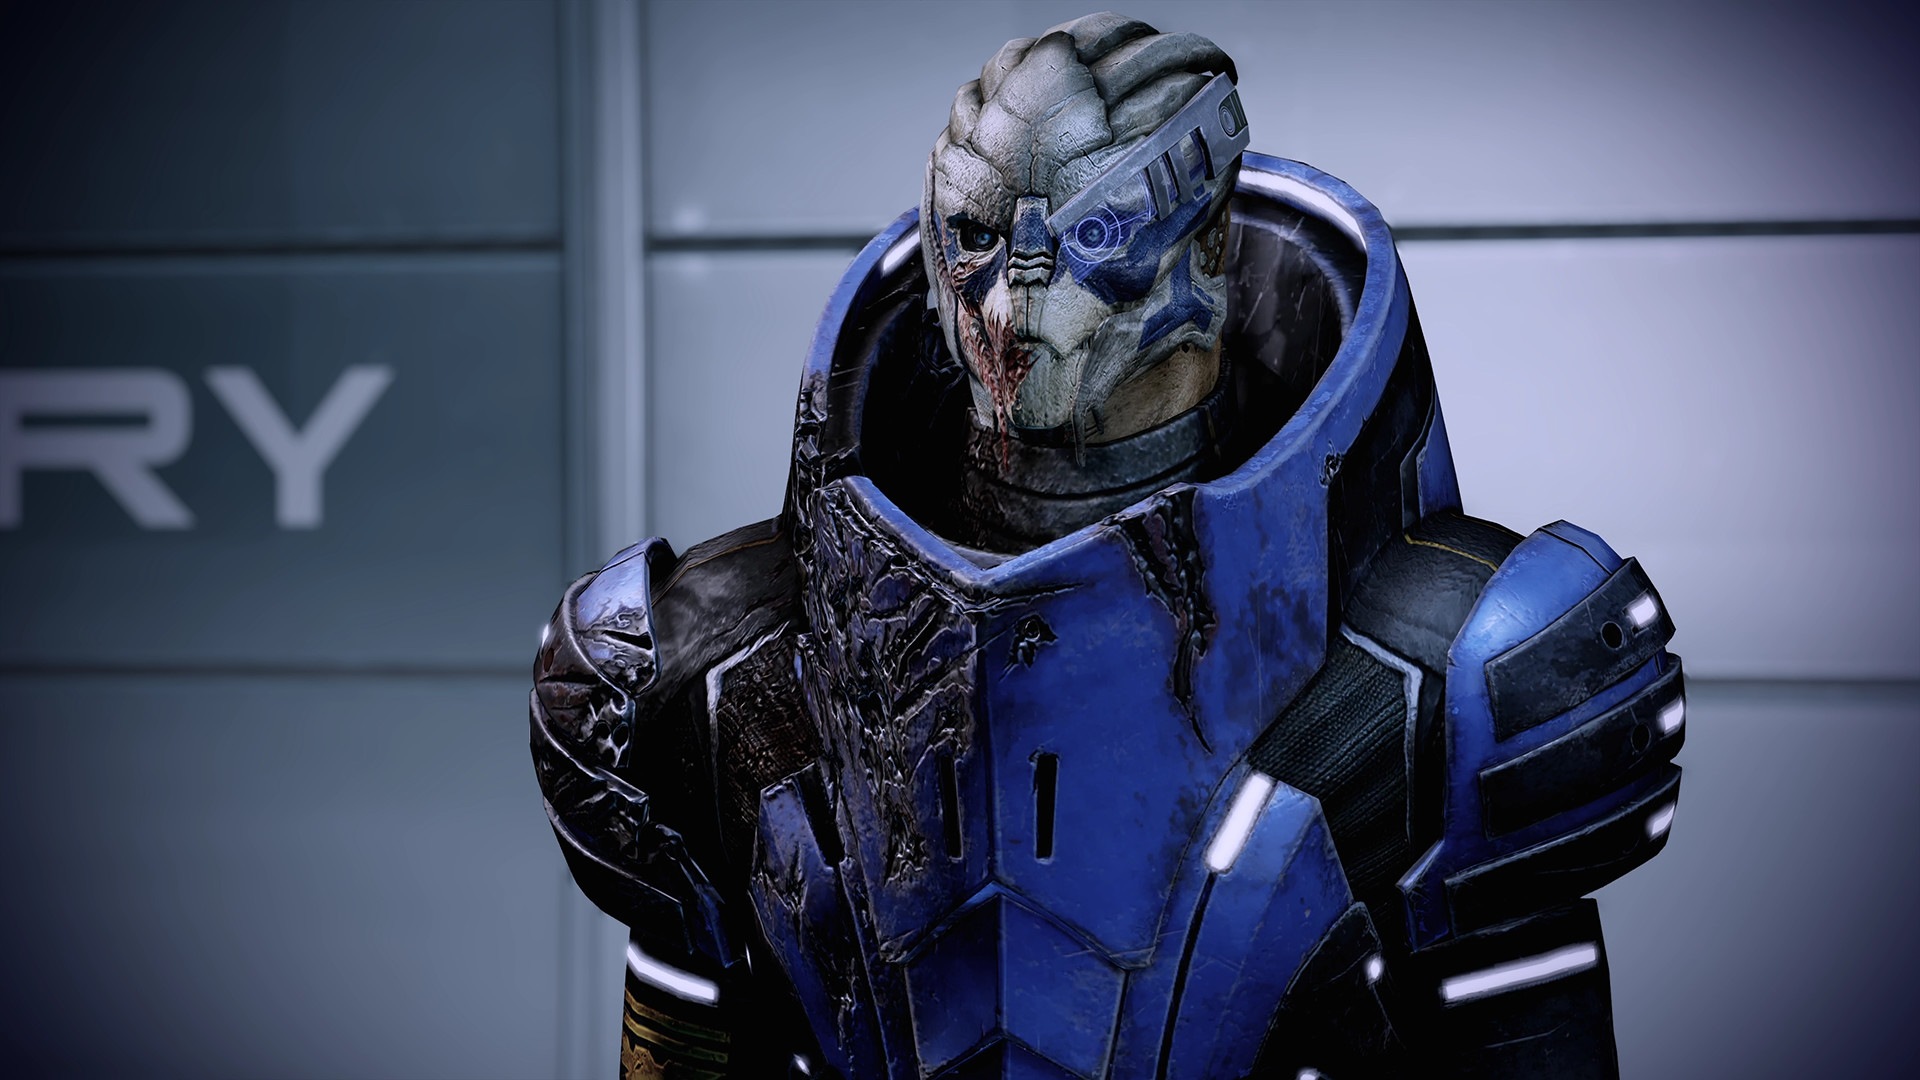 Former Mass Effect lead writer Mac Walters says the success of the Legendary Edition helped convince him to leave BioWare: ‘I don’t want to do any more Mass Effect after this’